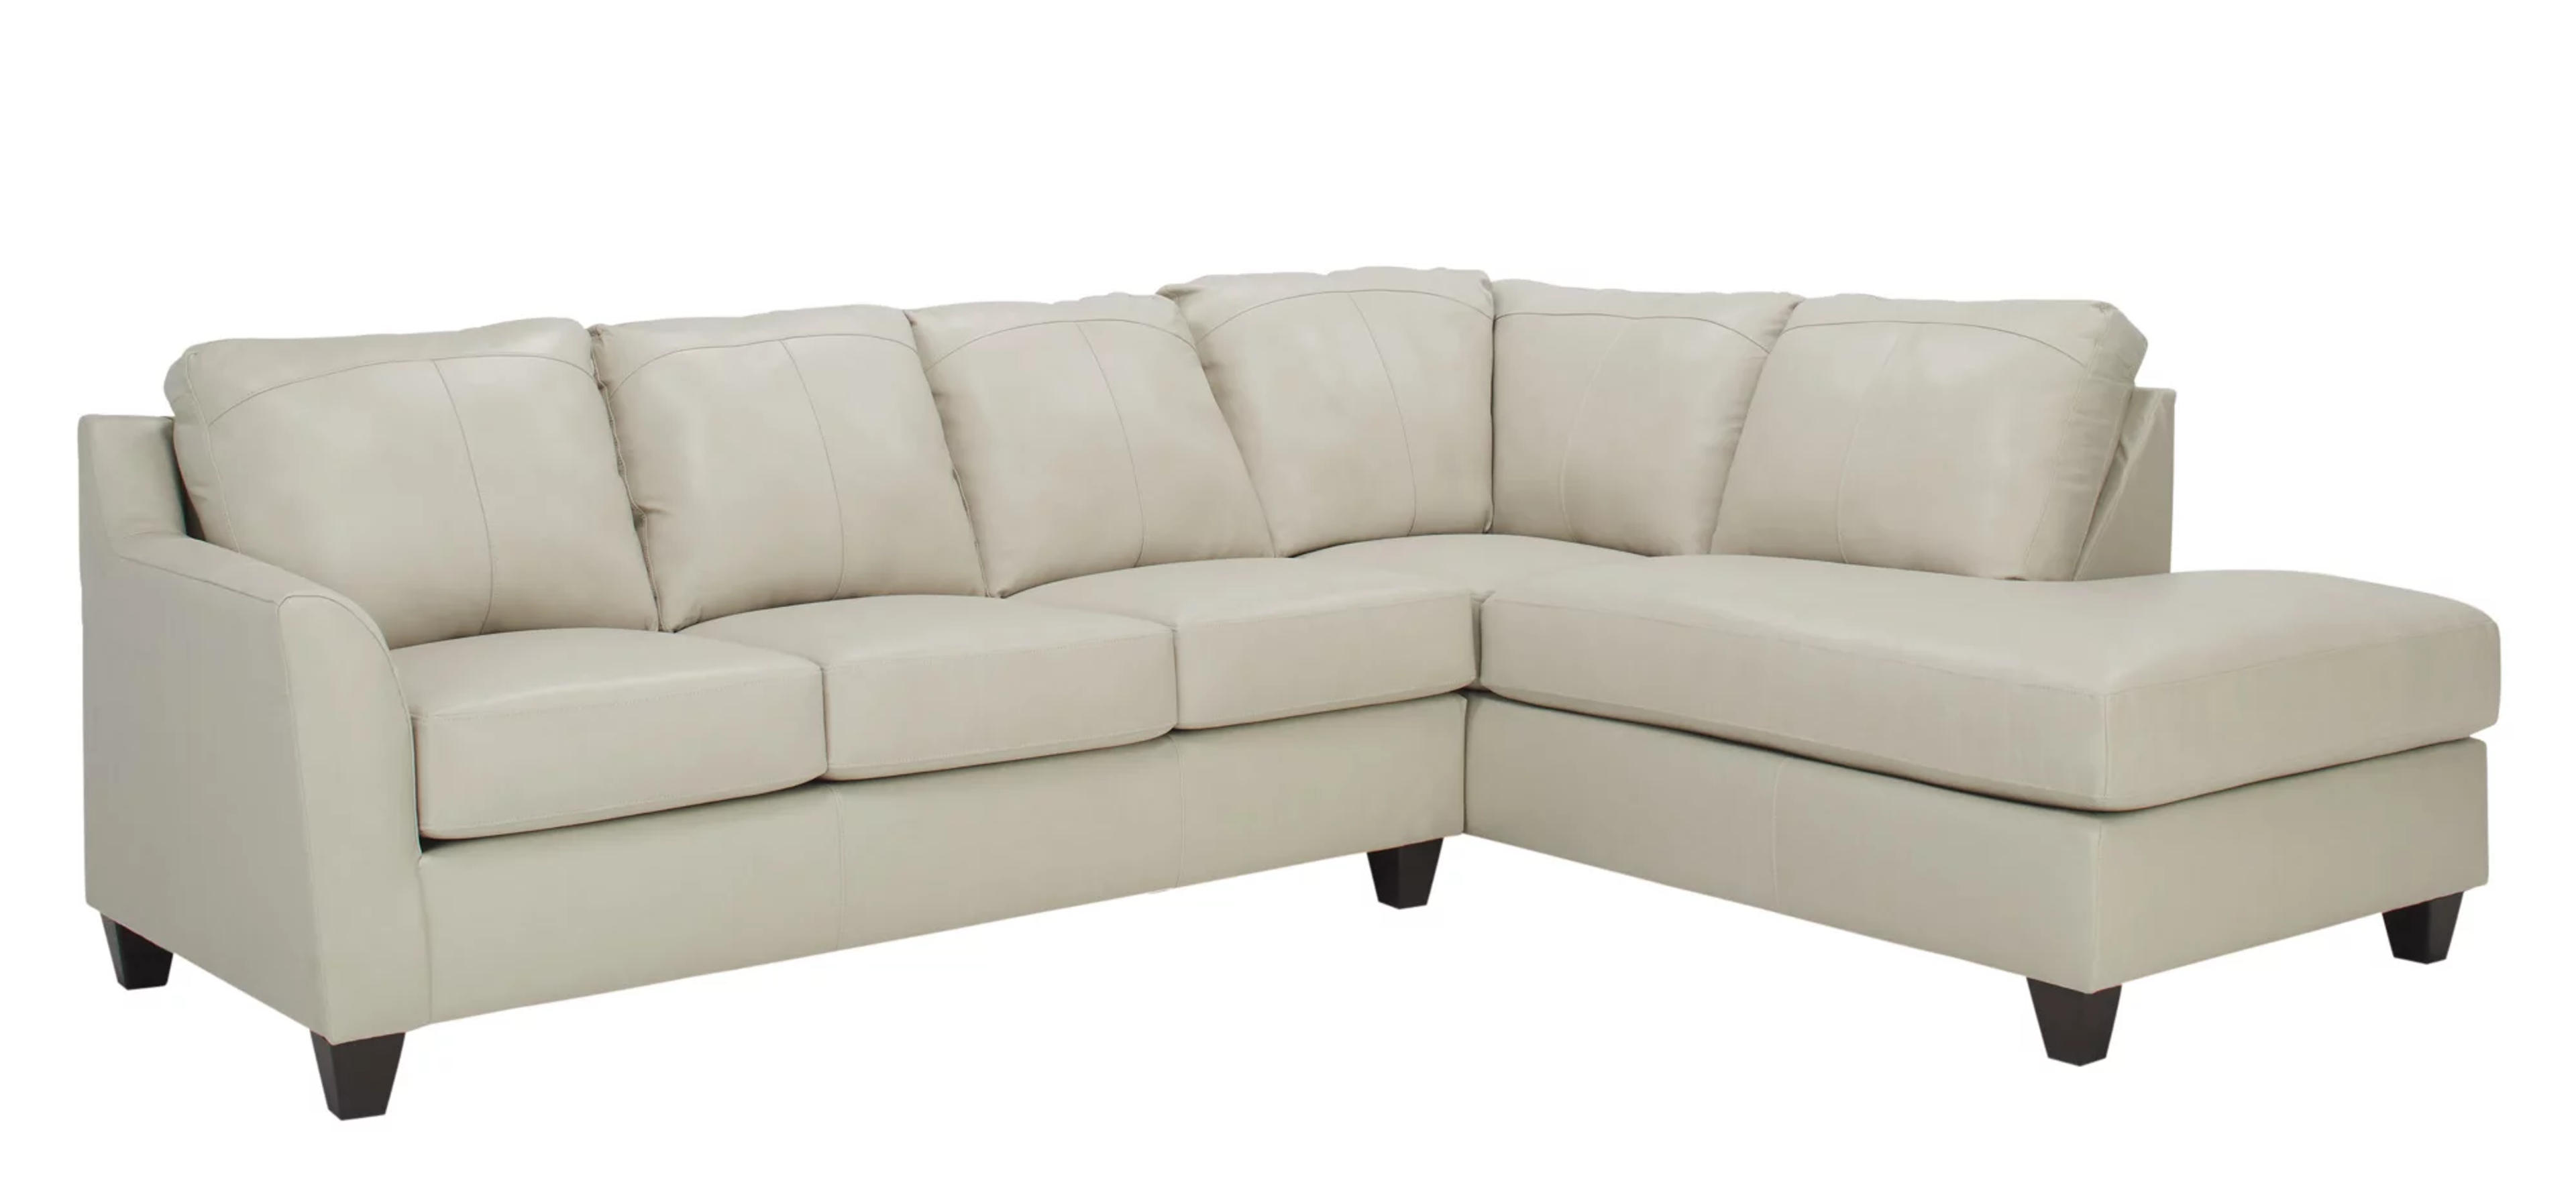 Montero Leather 2-pc. Sectional | Raymour & Flanigan